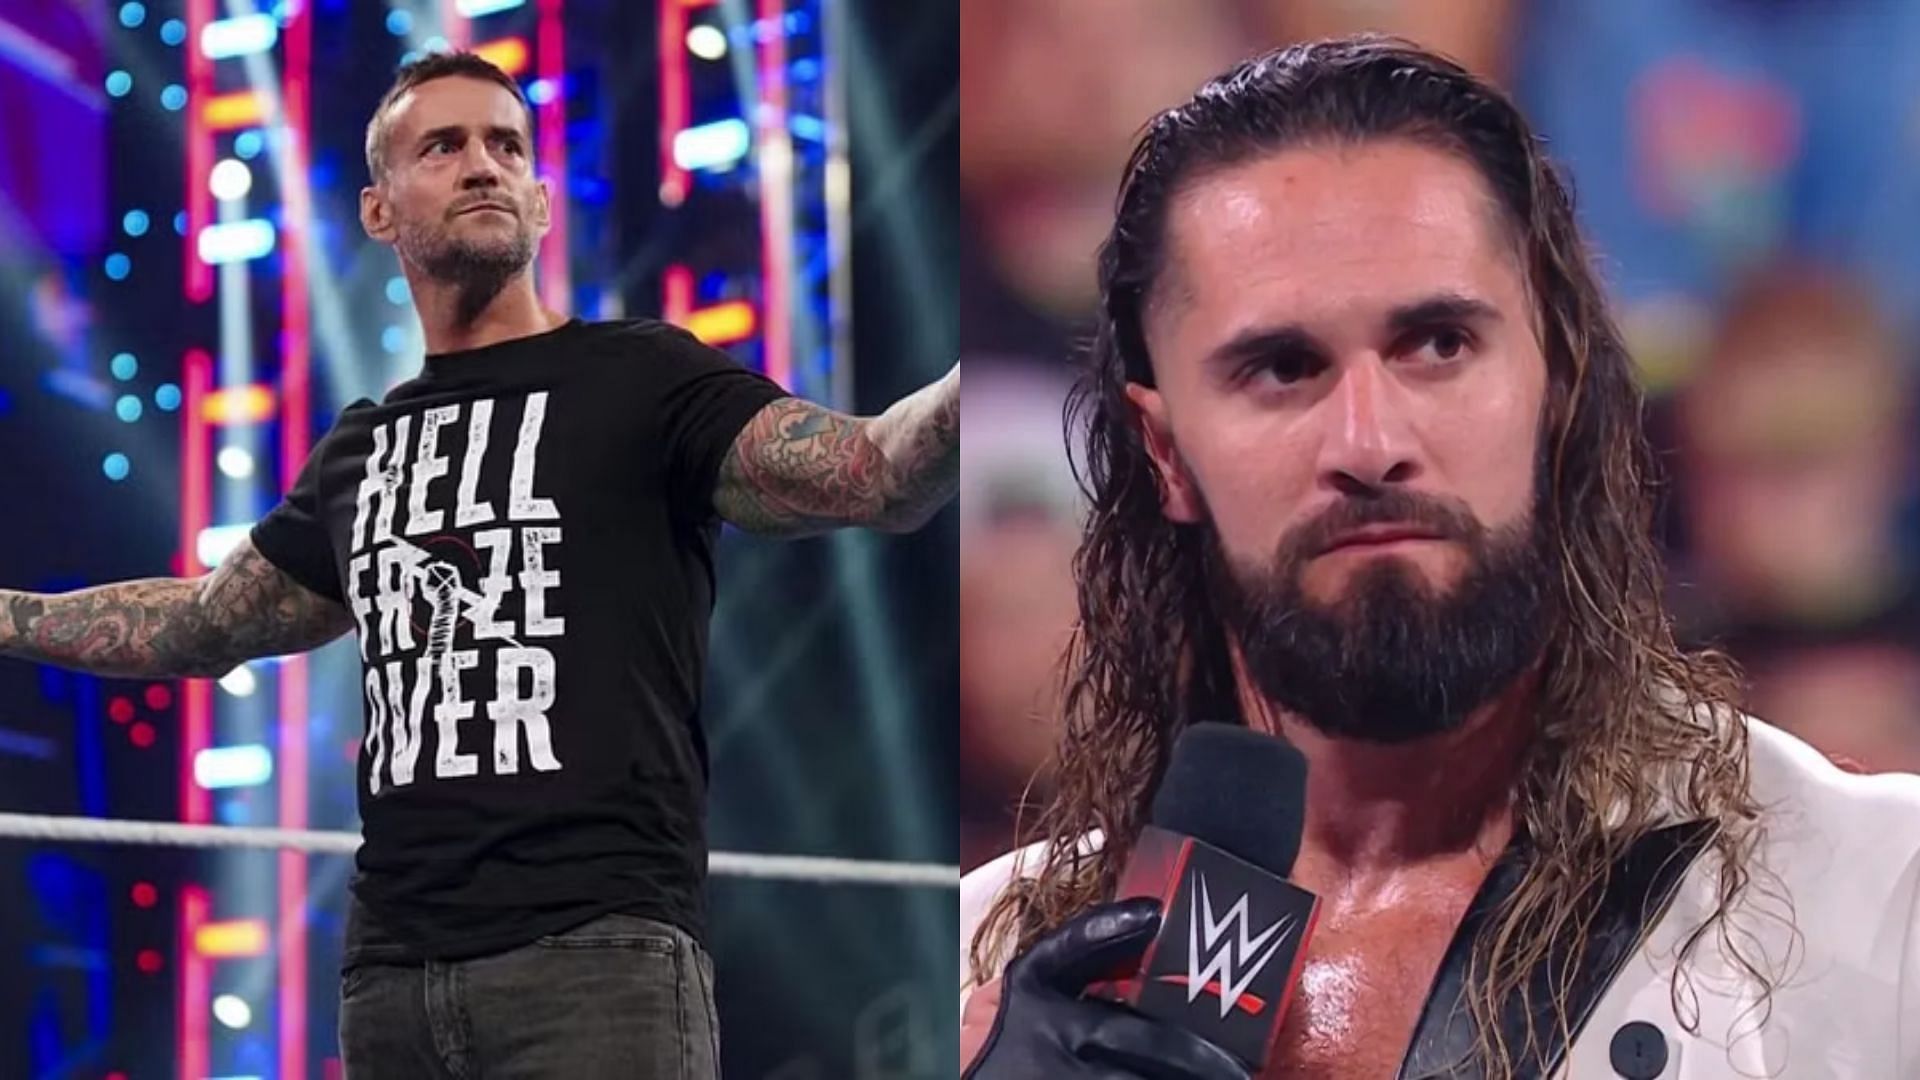 Seth Rollins and CM Punk came face to face on WWE RAW